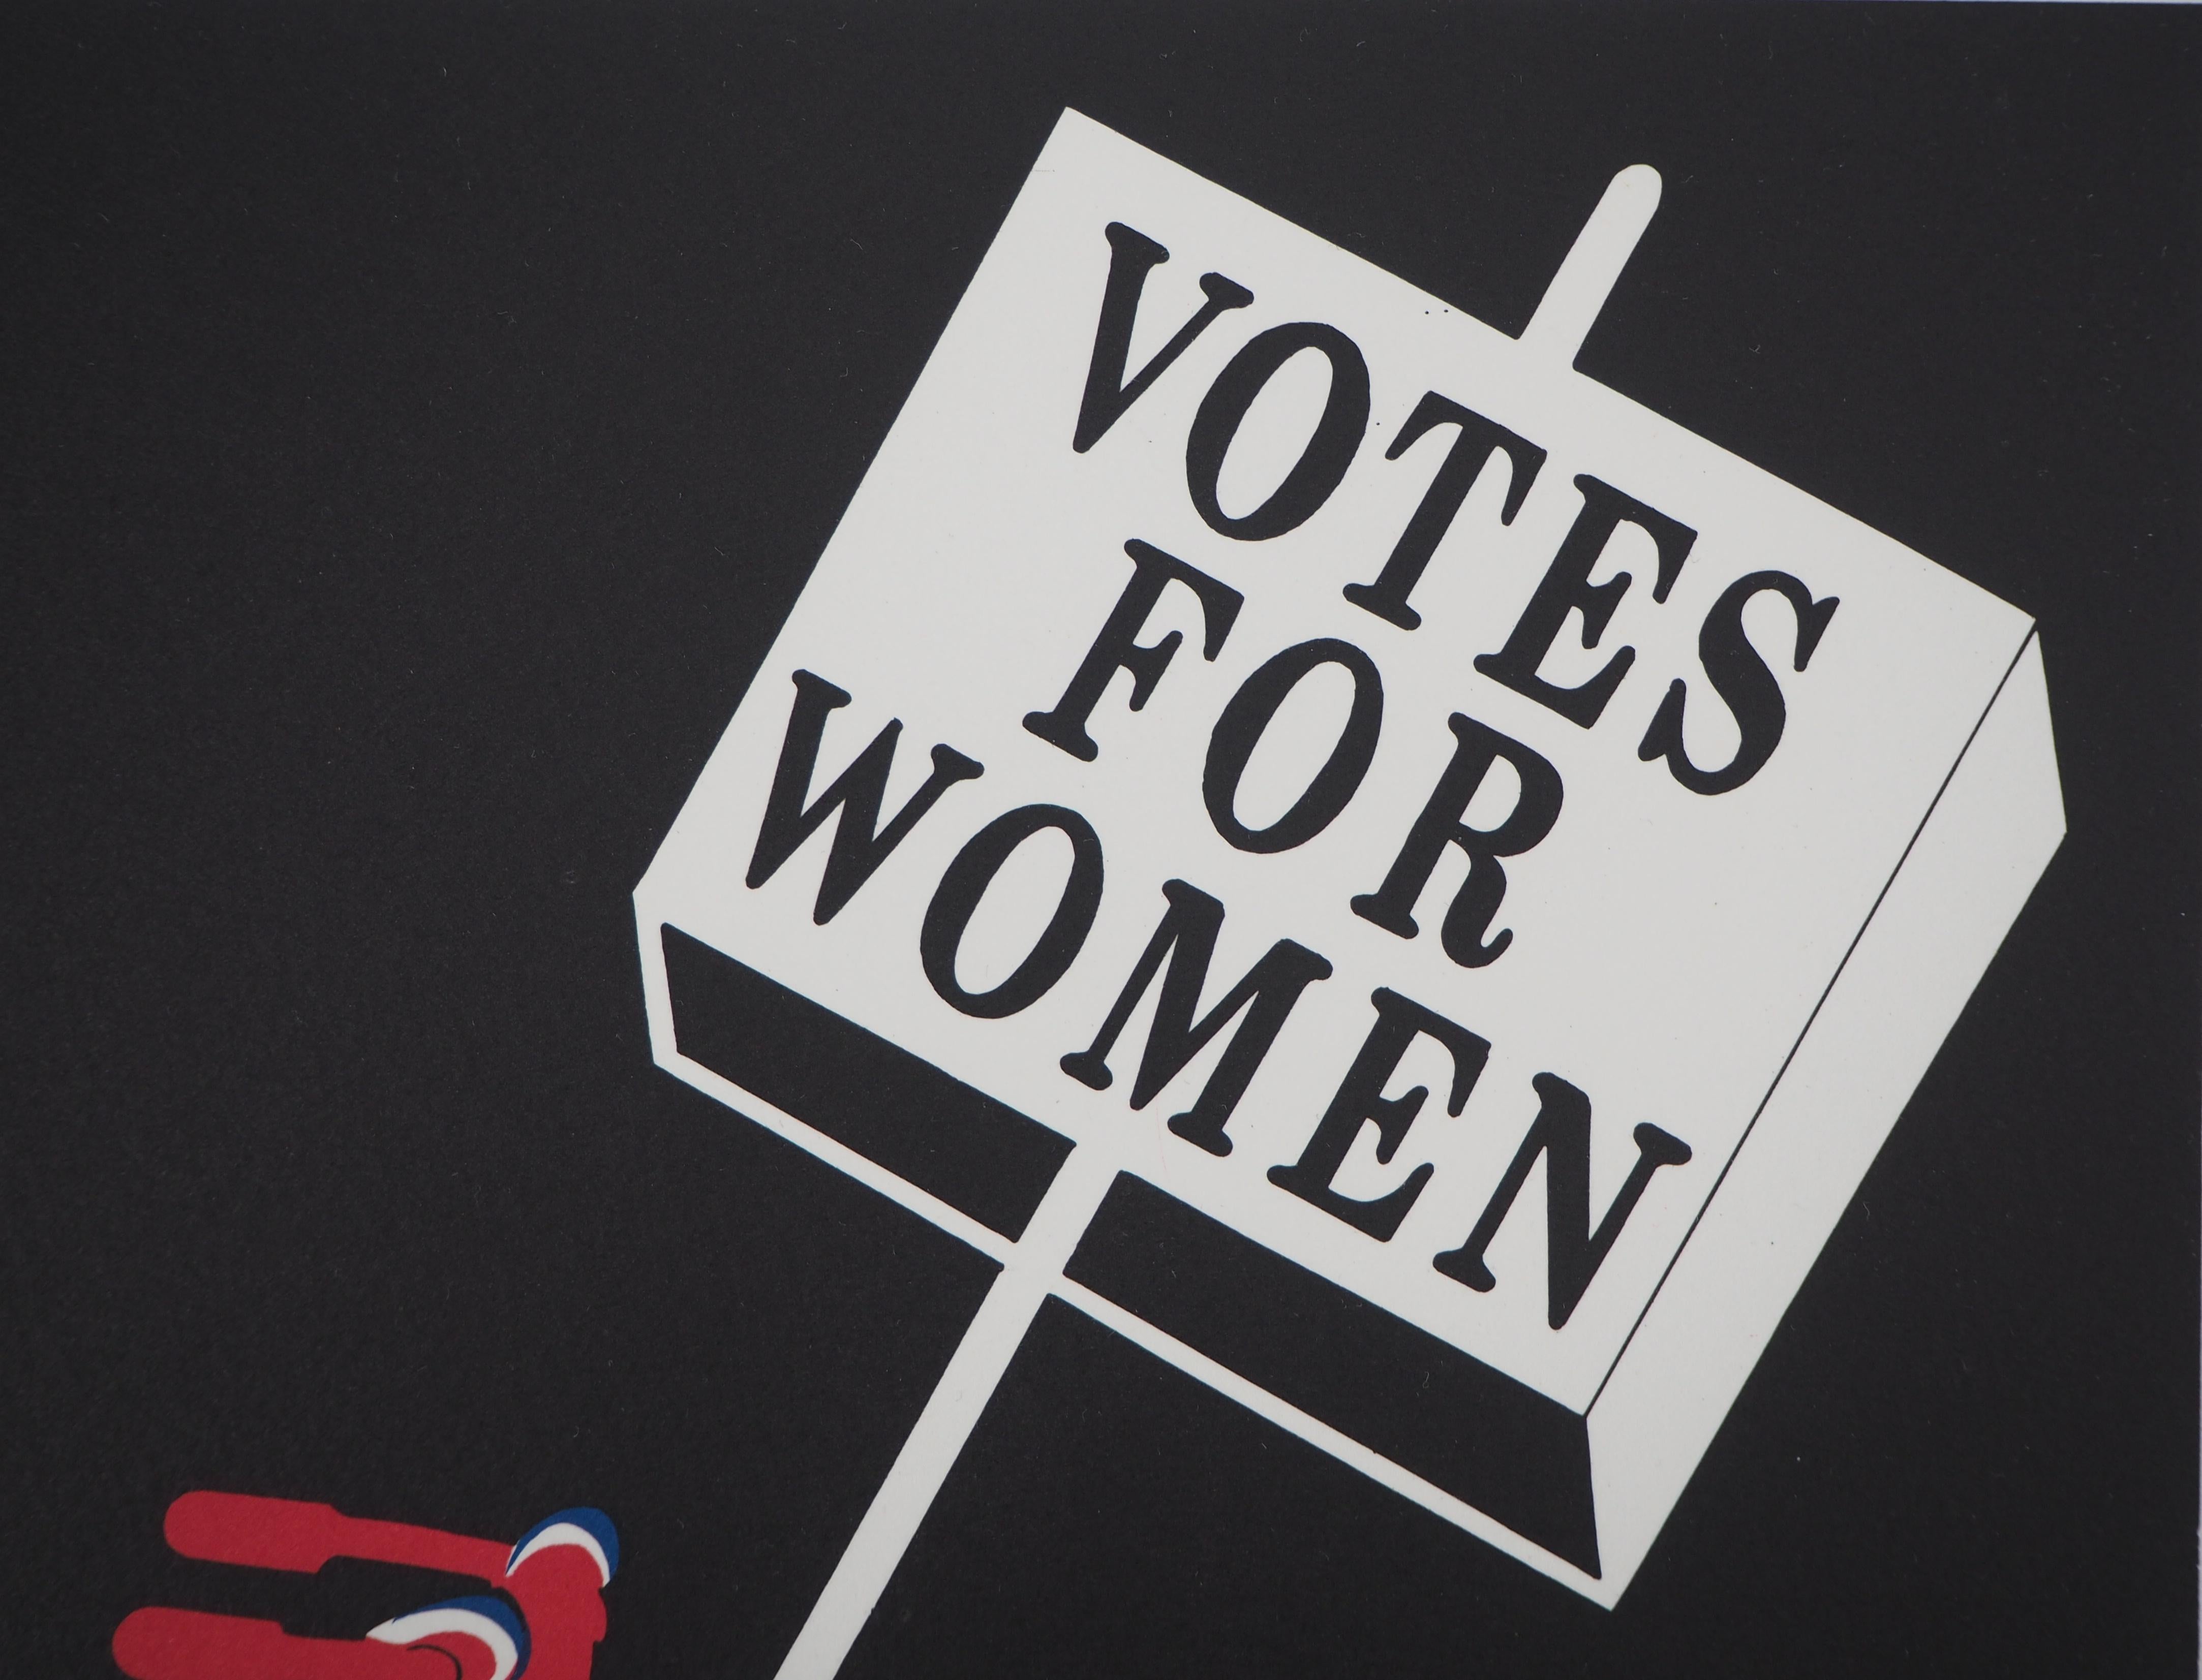 Votes for Women - Original lithograph, Handsigned and numbered / 150 2